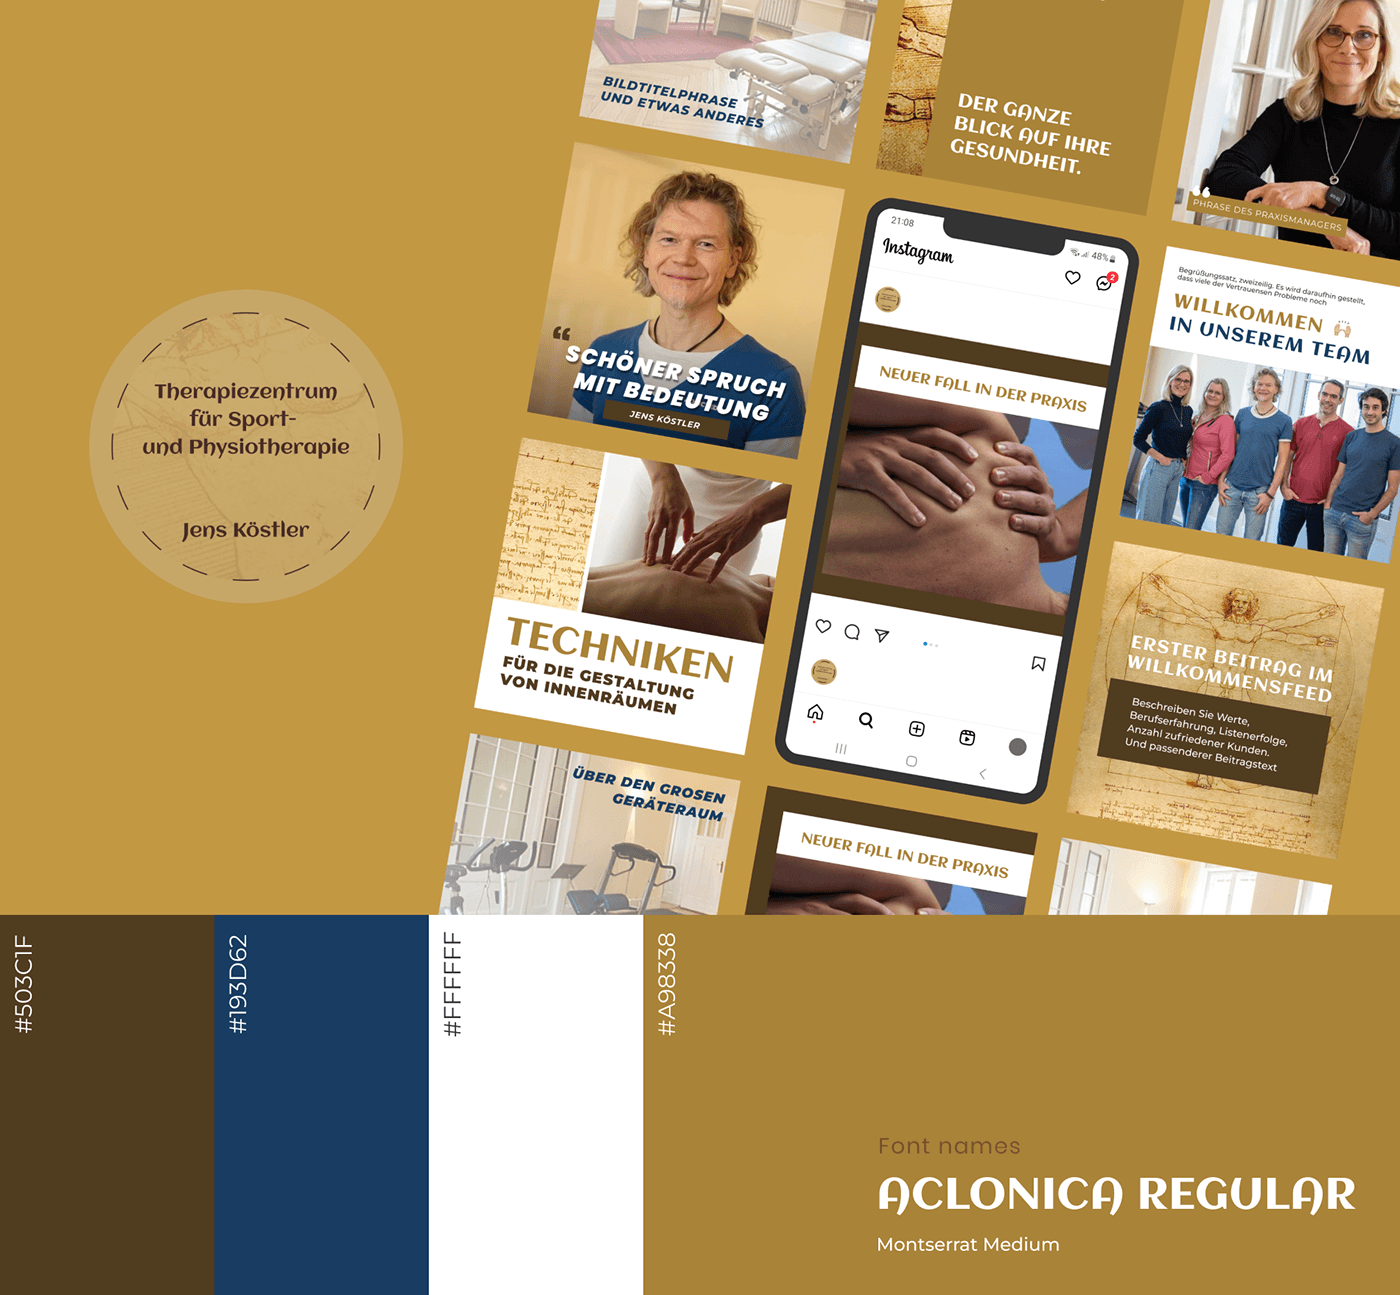 Instagram Feed Design For The Therapy Center